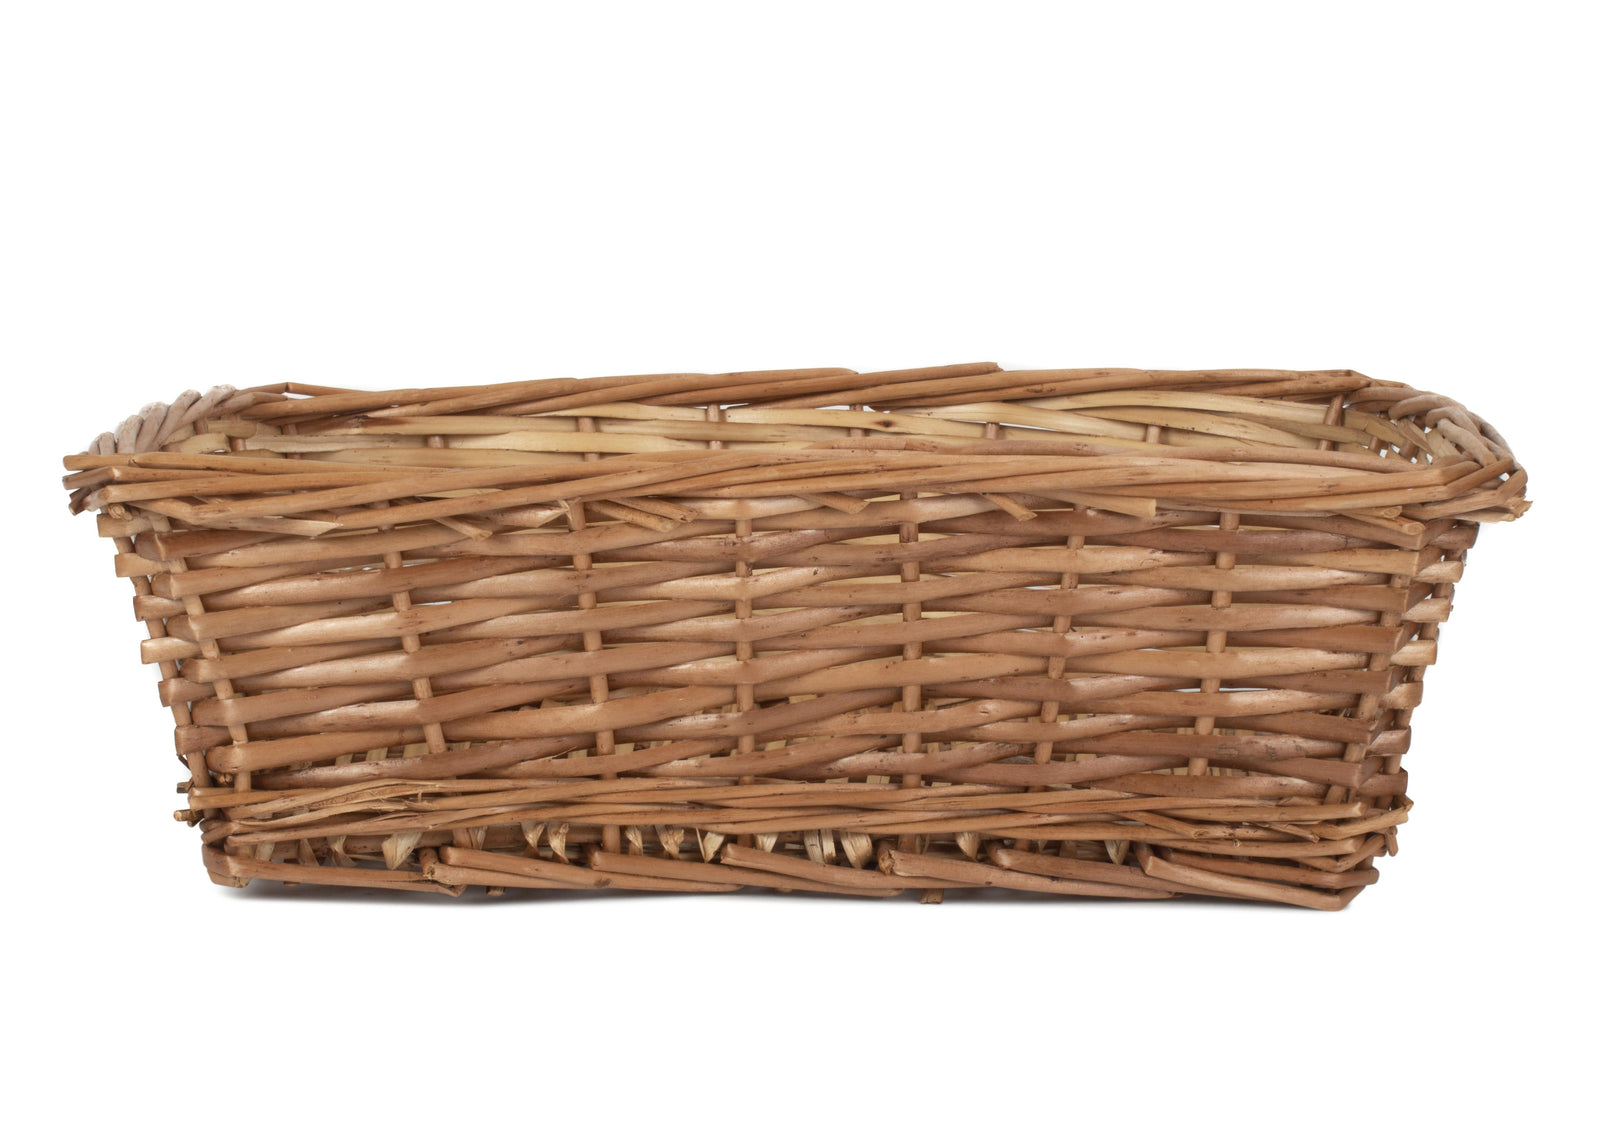 Red Hamper Tapered Split Willow Tray